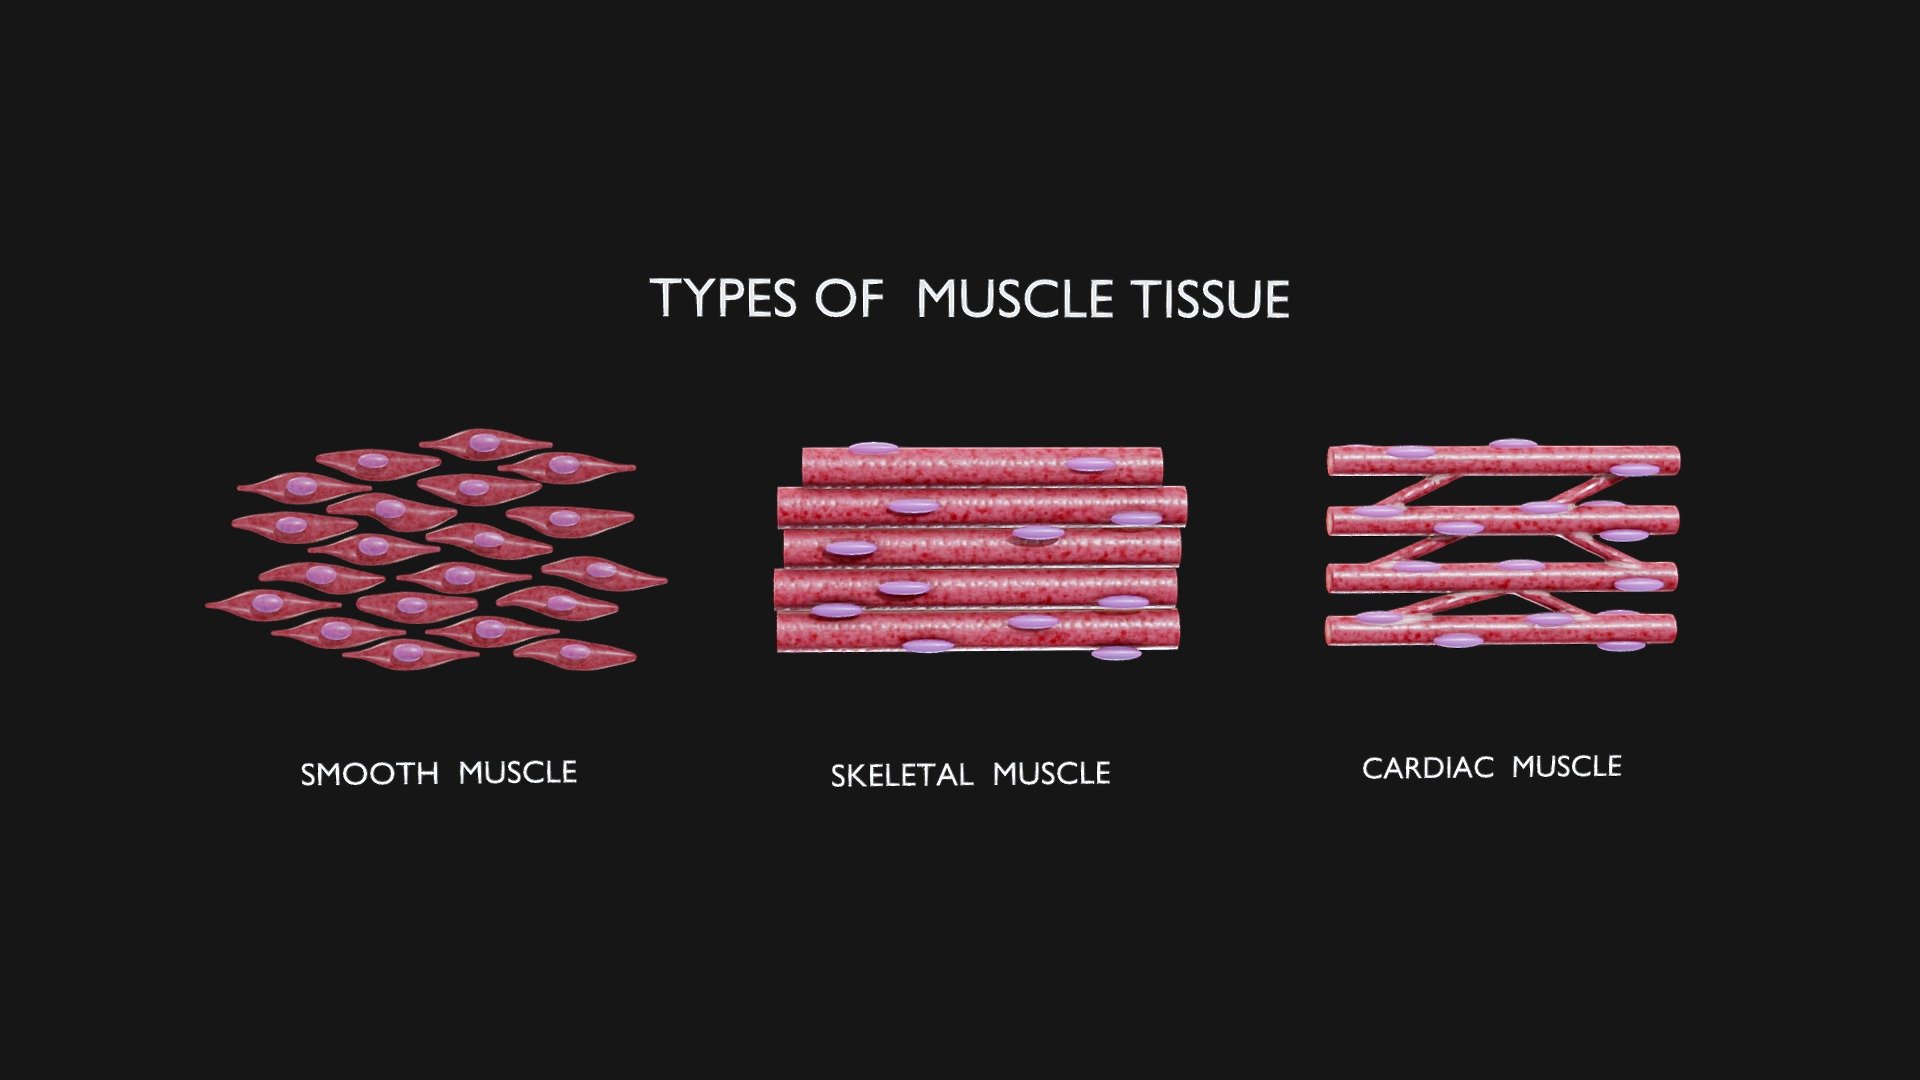 Types of Muscle Tissue

Smooth muscle is found in organs and structures like the digestive tract, skeletal muscle is attached to bones for voluntary movement, and cardiac muscle forms the heart, facilitating involuntary contractions to pump blood.




Format: FBX, OBJ, MTL, STL, glb, glTF, Blender v4.0.0

Optimized UVs (Non-Overlapping UVs)

PBR Textures | 1024x1024 - 2048x2048 - 4096x4096 | (1K, 2K, 4K - Jpeg, Png)

Base Color (Albedo)

Normal Map

AO Map

Metallic Map

Roughness Map

Height Map

Opacity Map
 - Types of Muscle Tissue - Buy Royalty Free 3D model by Nima (@h3ydari96) 3d model